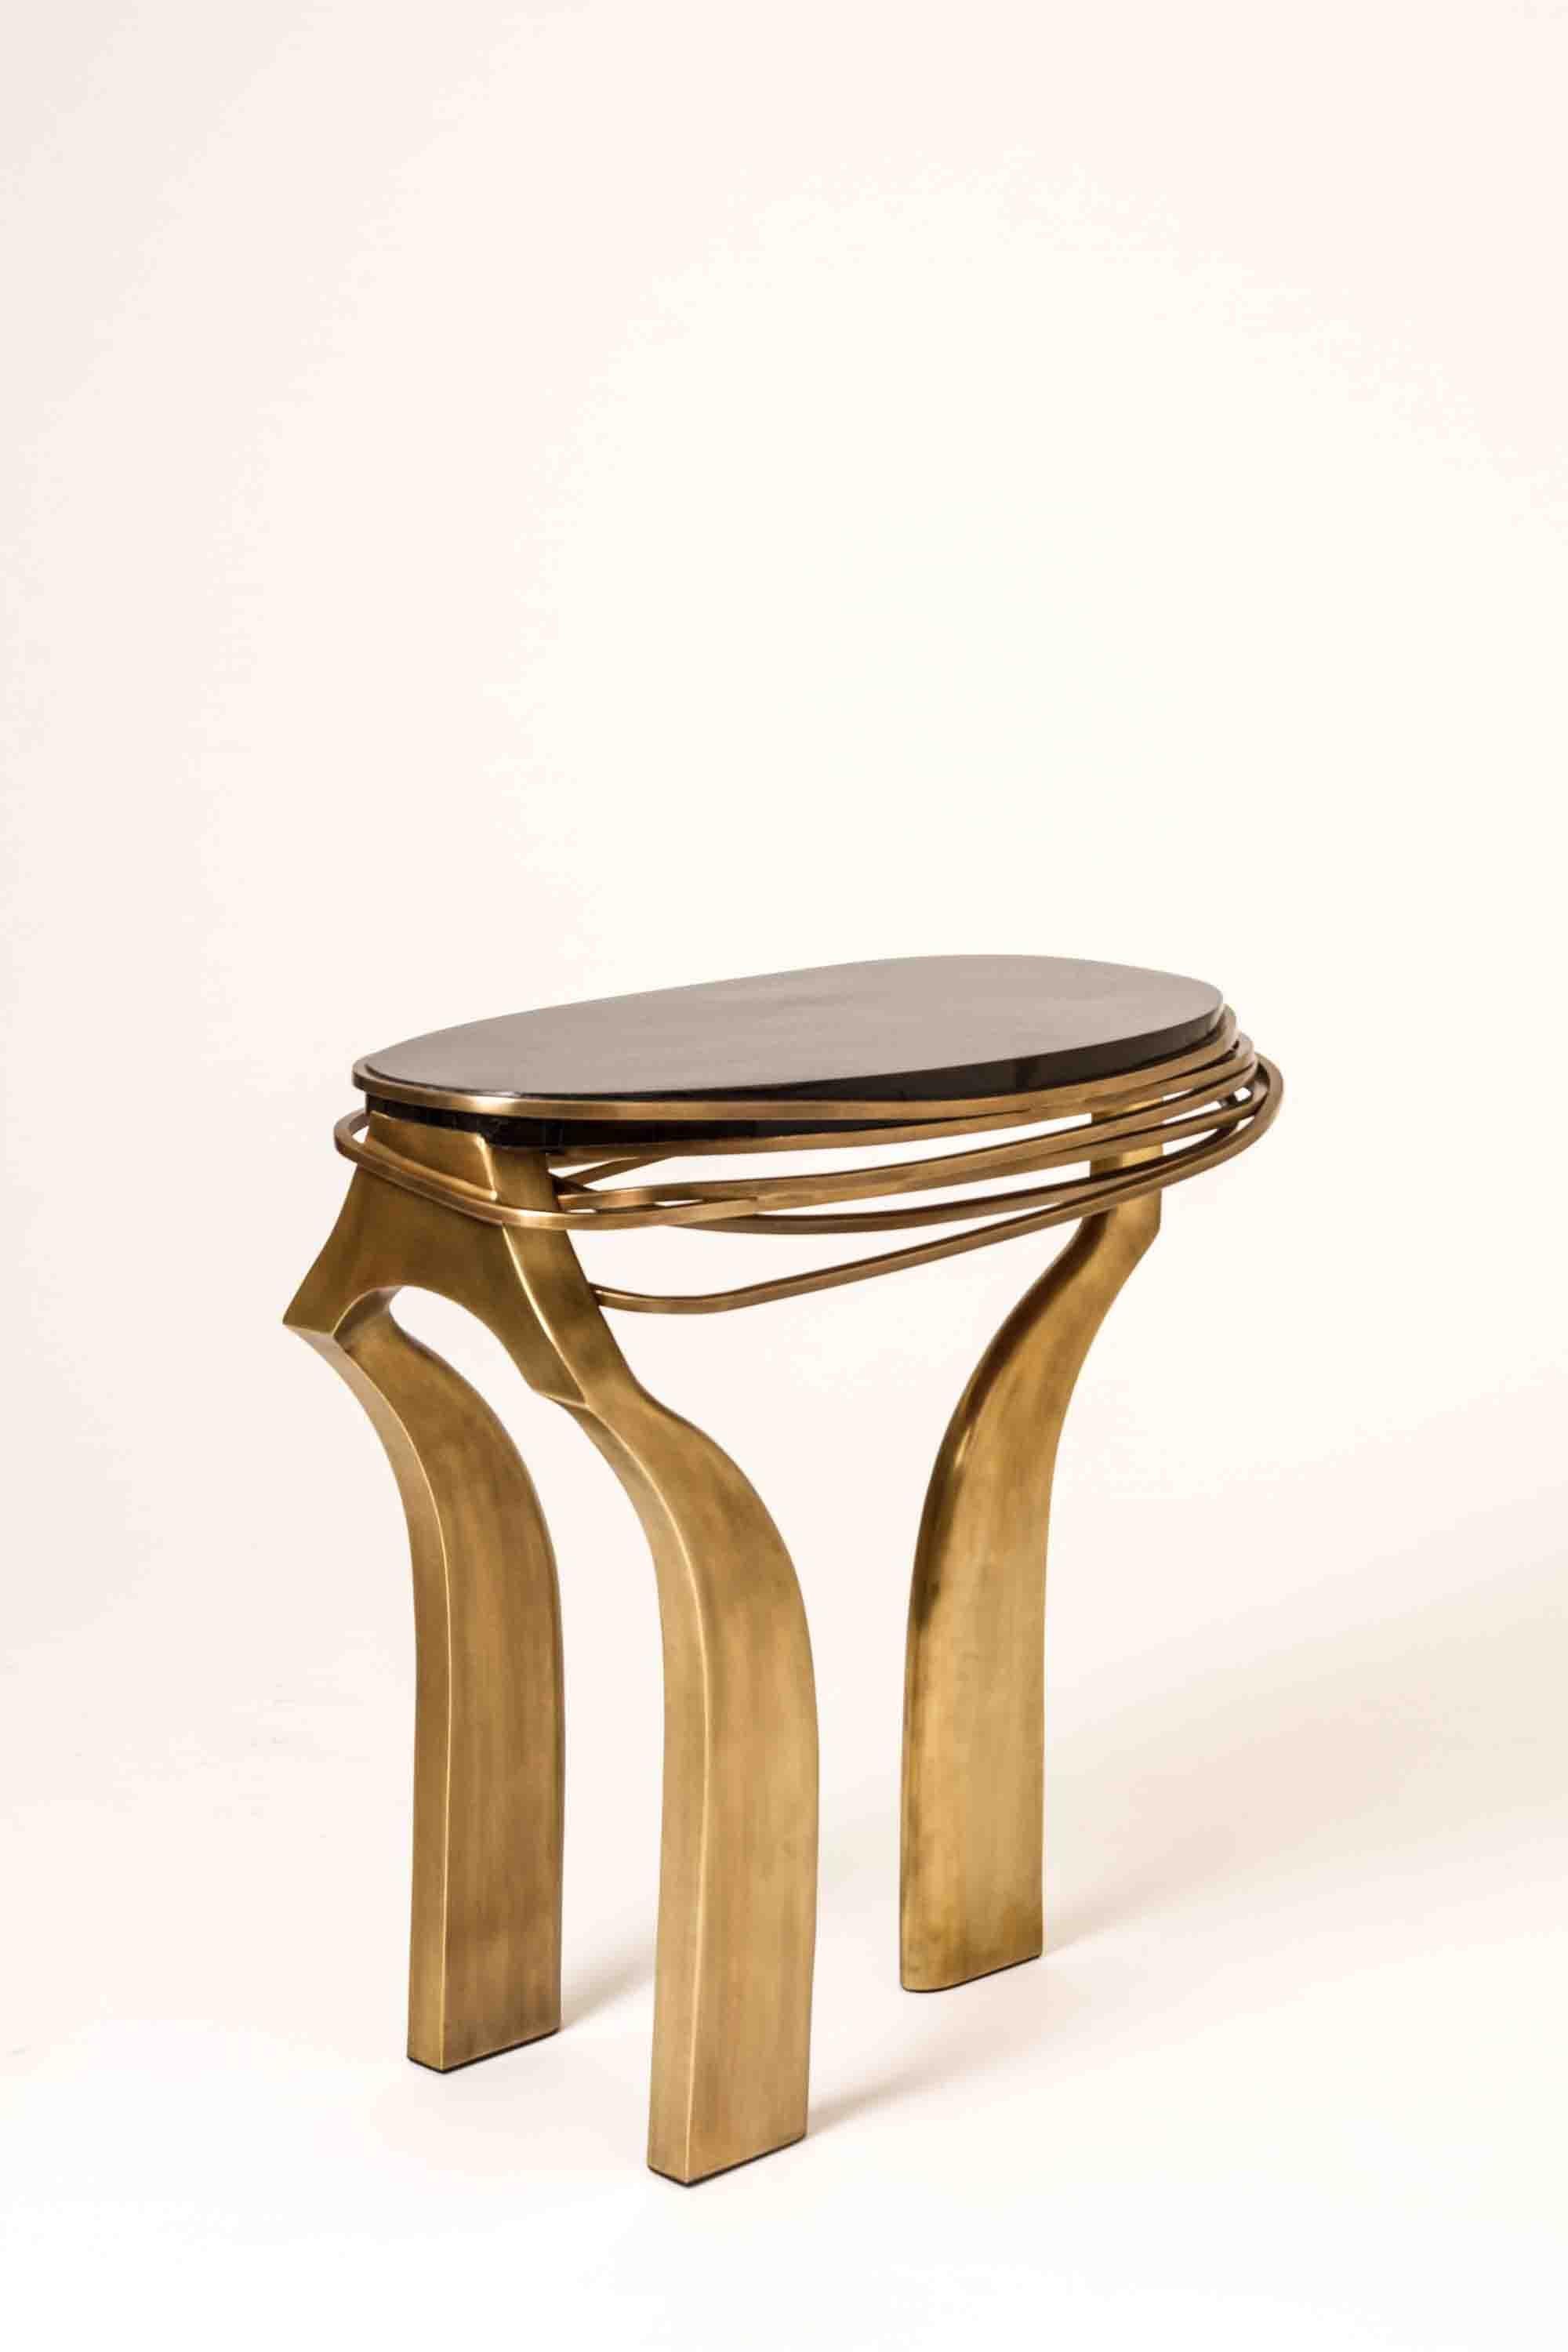 The Galaxy side table in Large is an iconic Kifu Paris piece. Whimsical, sculptural and bold this piece makes the ultimate accent piece in any space. The intricate bronze-patina brass rings encircle the black pen shell amorphous-shaped inlaid top.